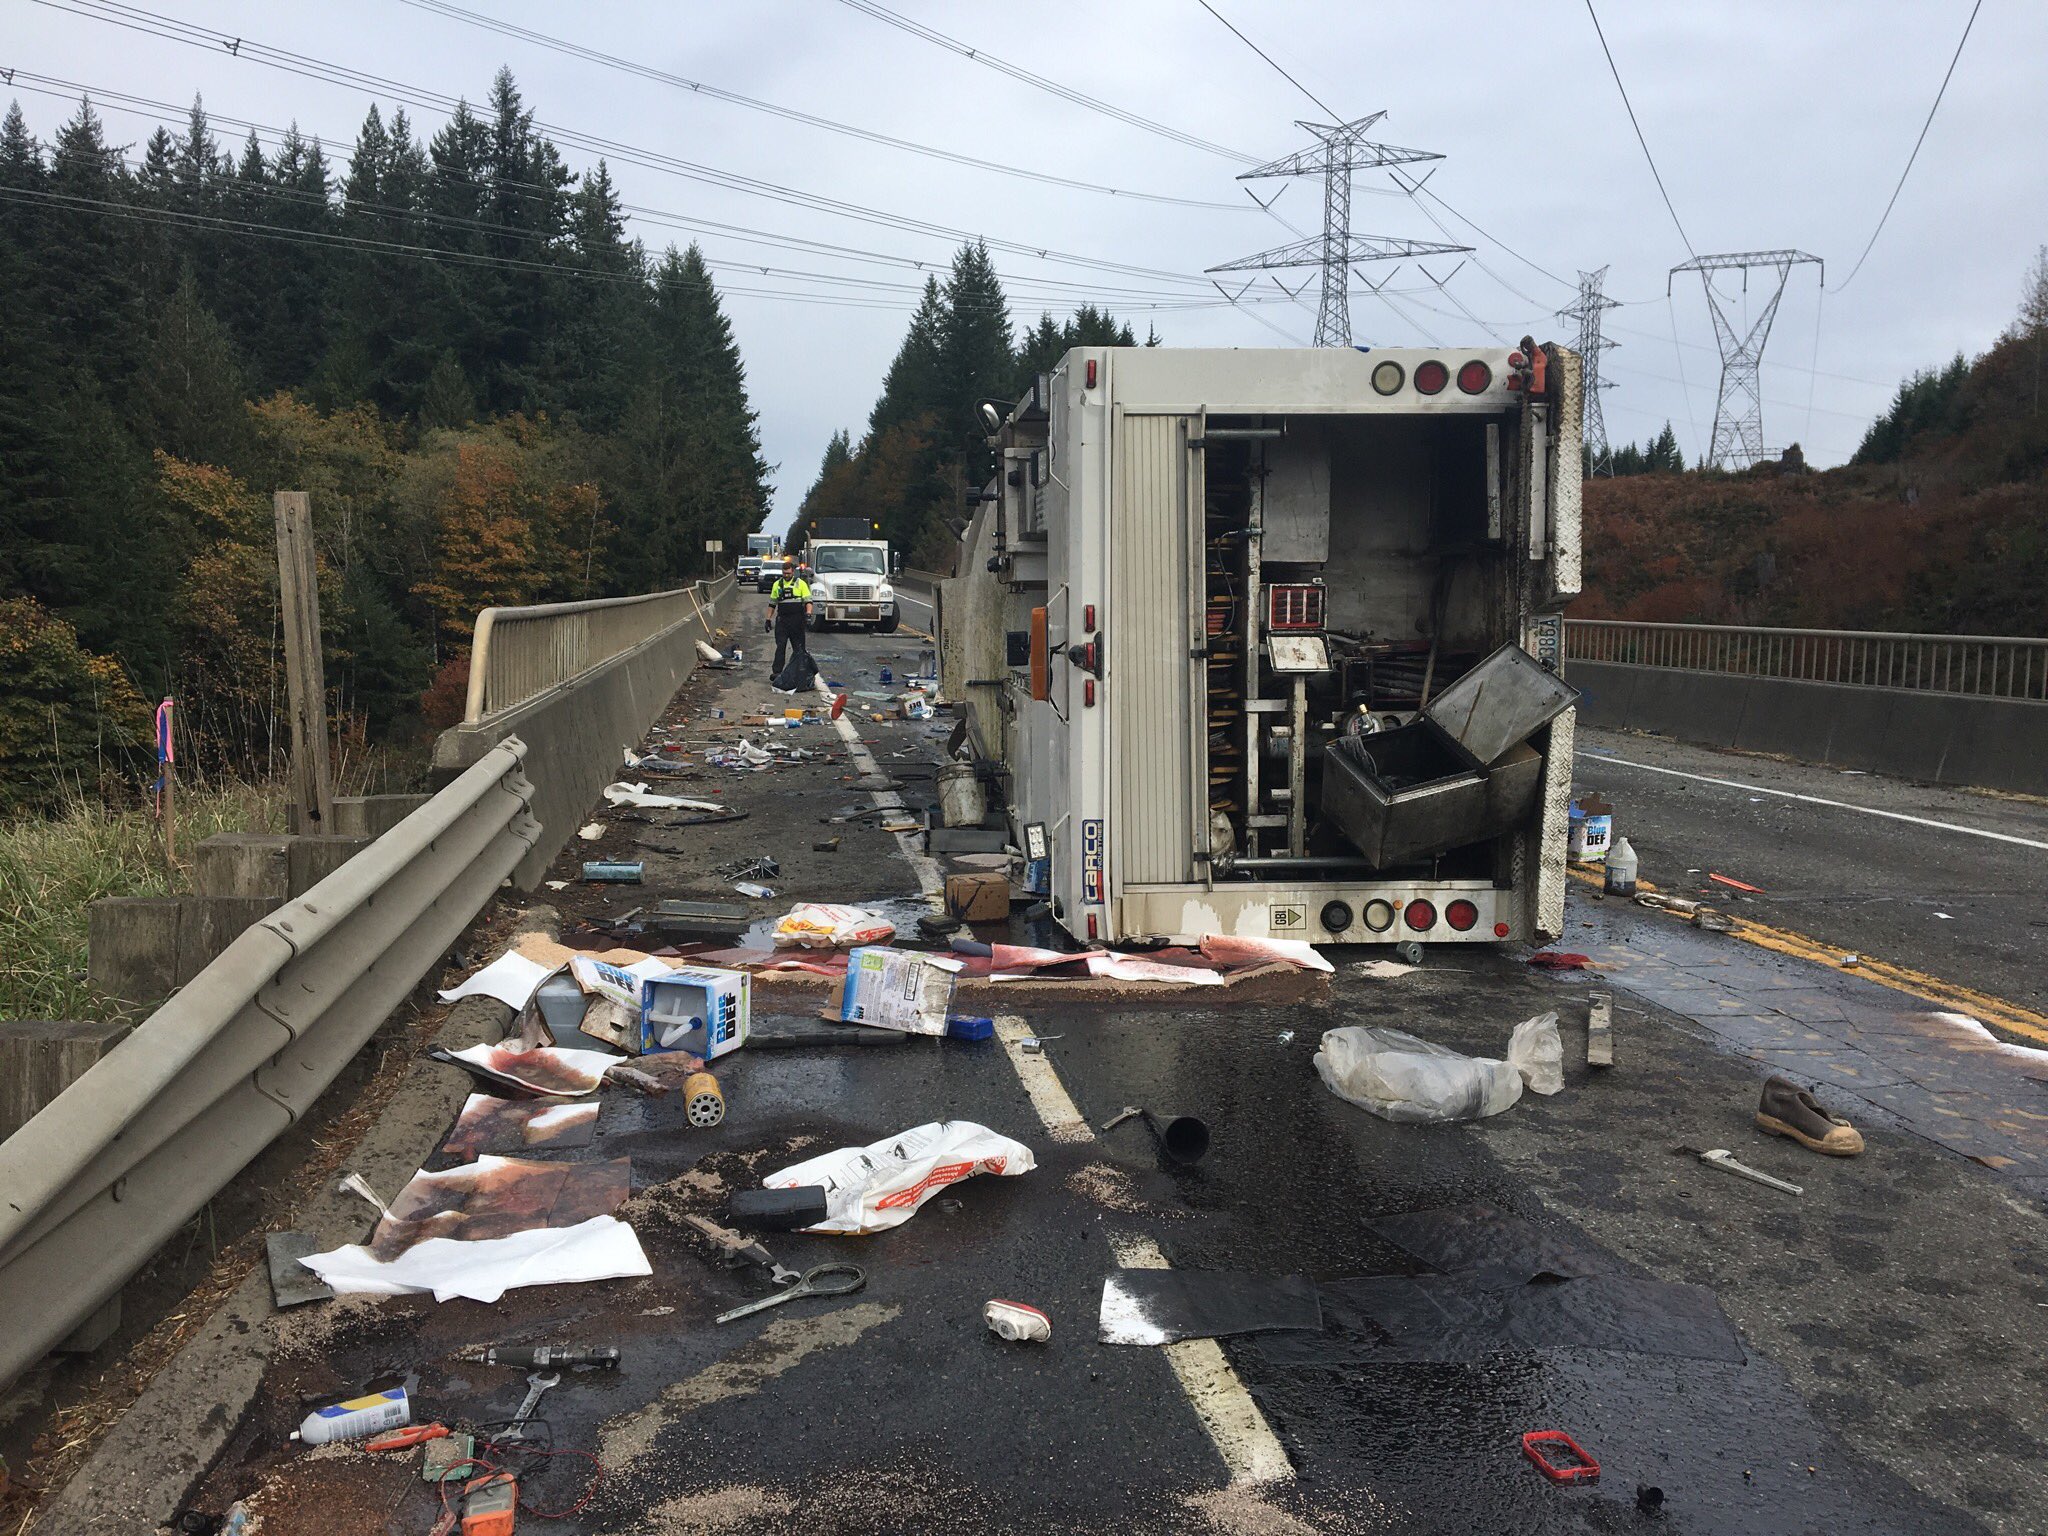 Truck on its side with fuel and other materials on the road.